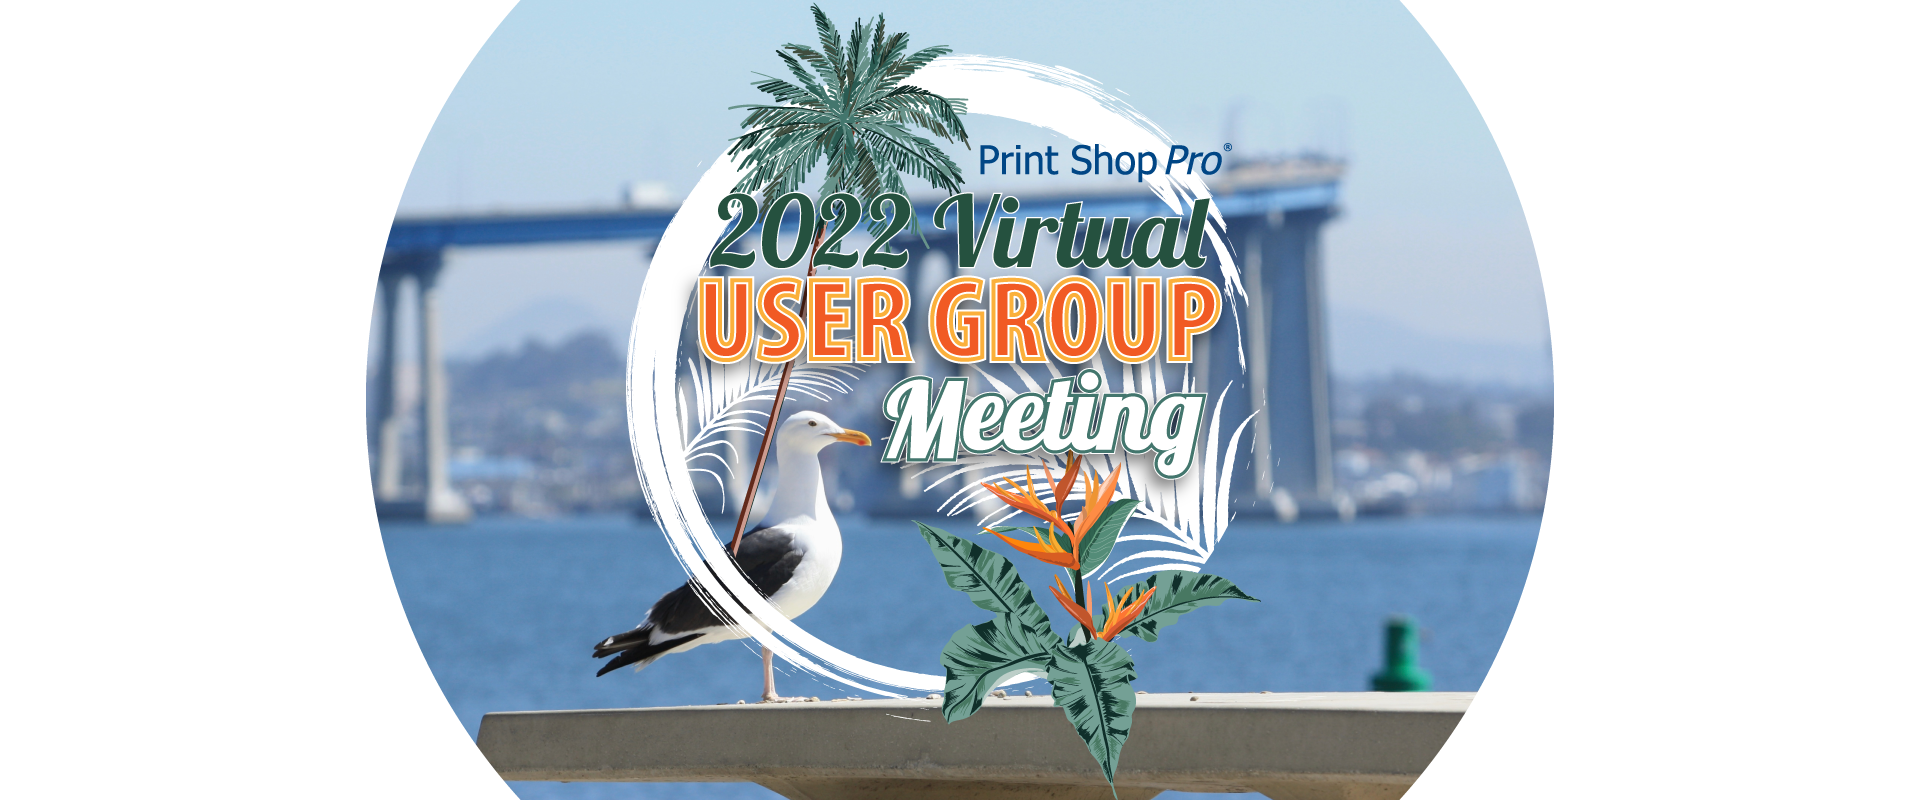 2022 Virtual User Group Meeting Graphic